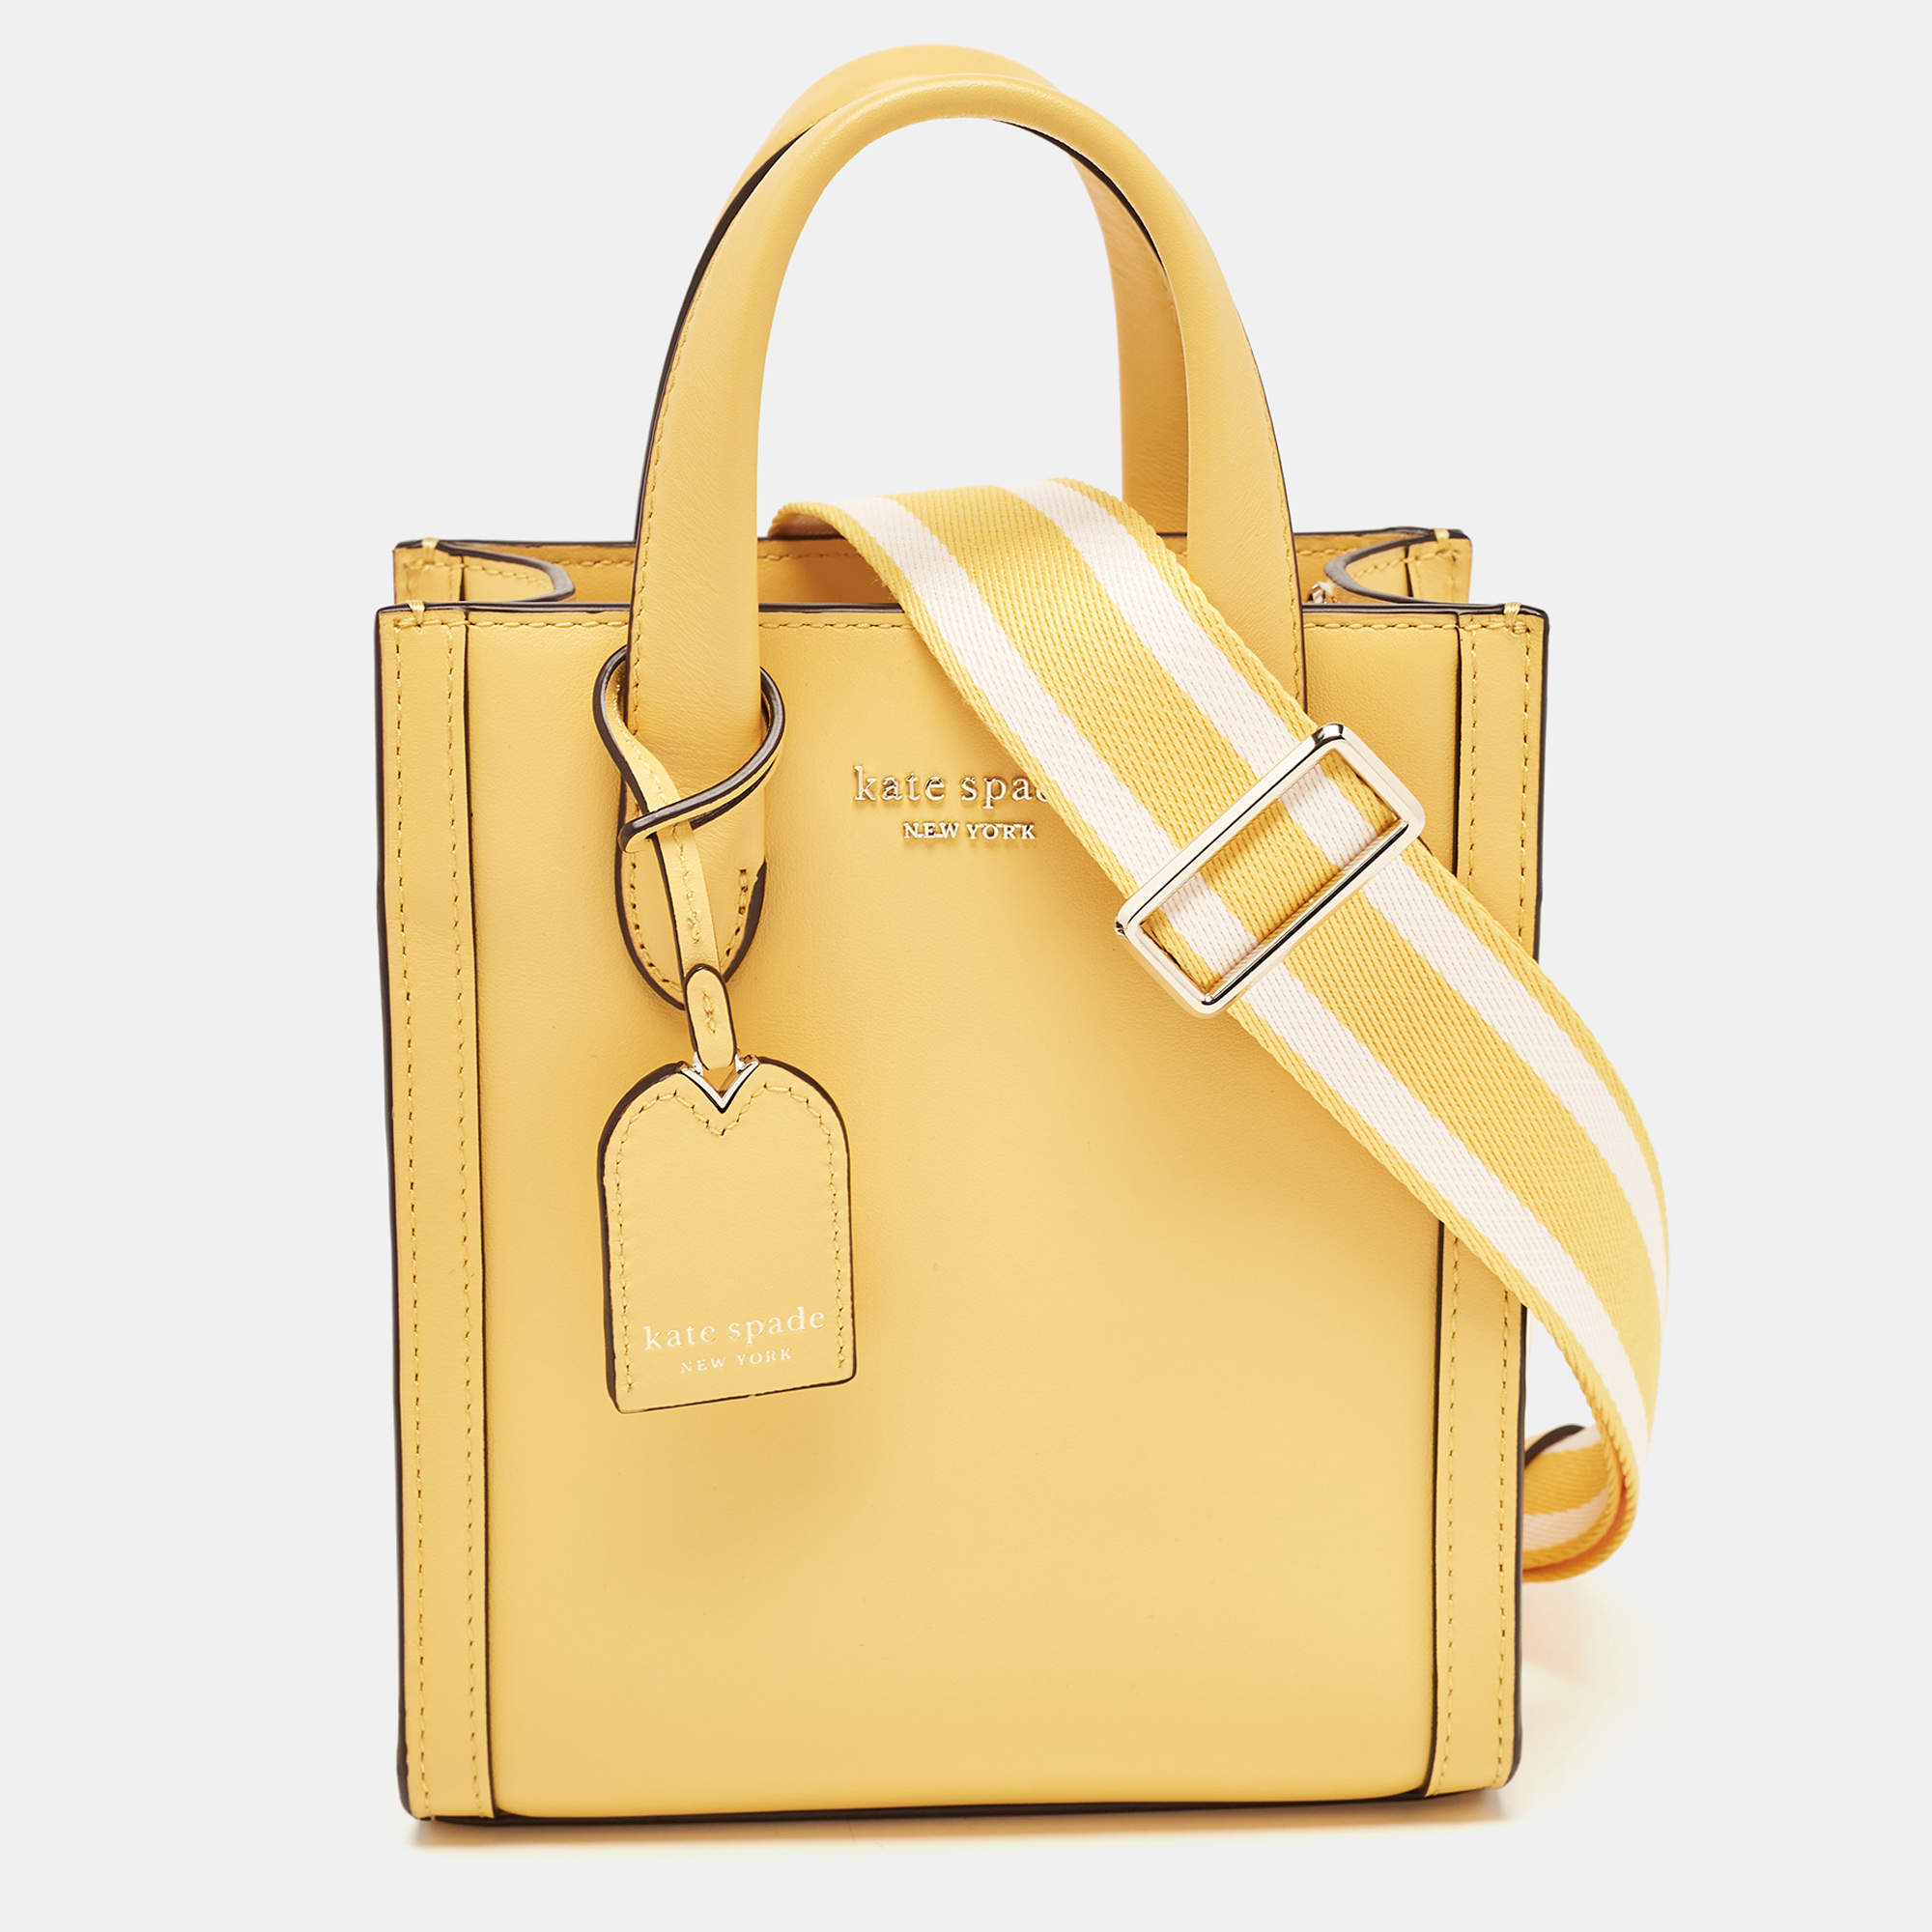 Valentines Gifts For Her Women Handbags Shoulder Tote Bag Soft Genuine  Leather Top-handle Purse,yellow，G107764 - Walmart.com